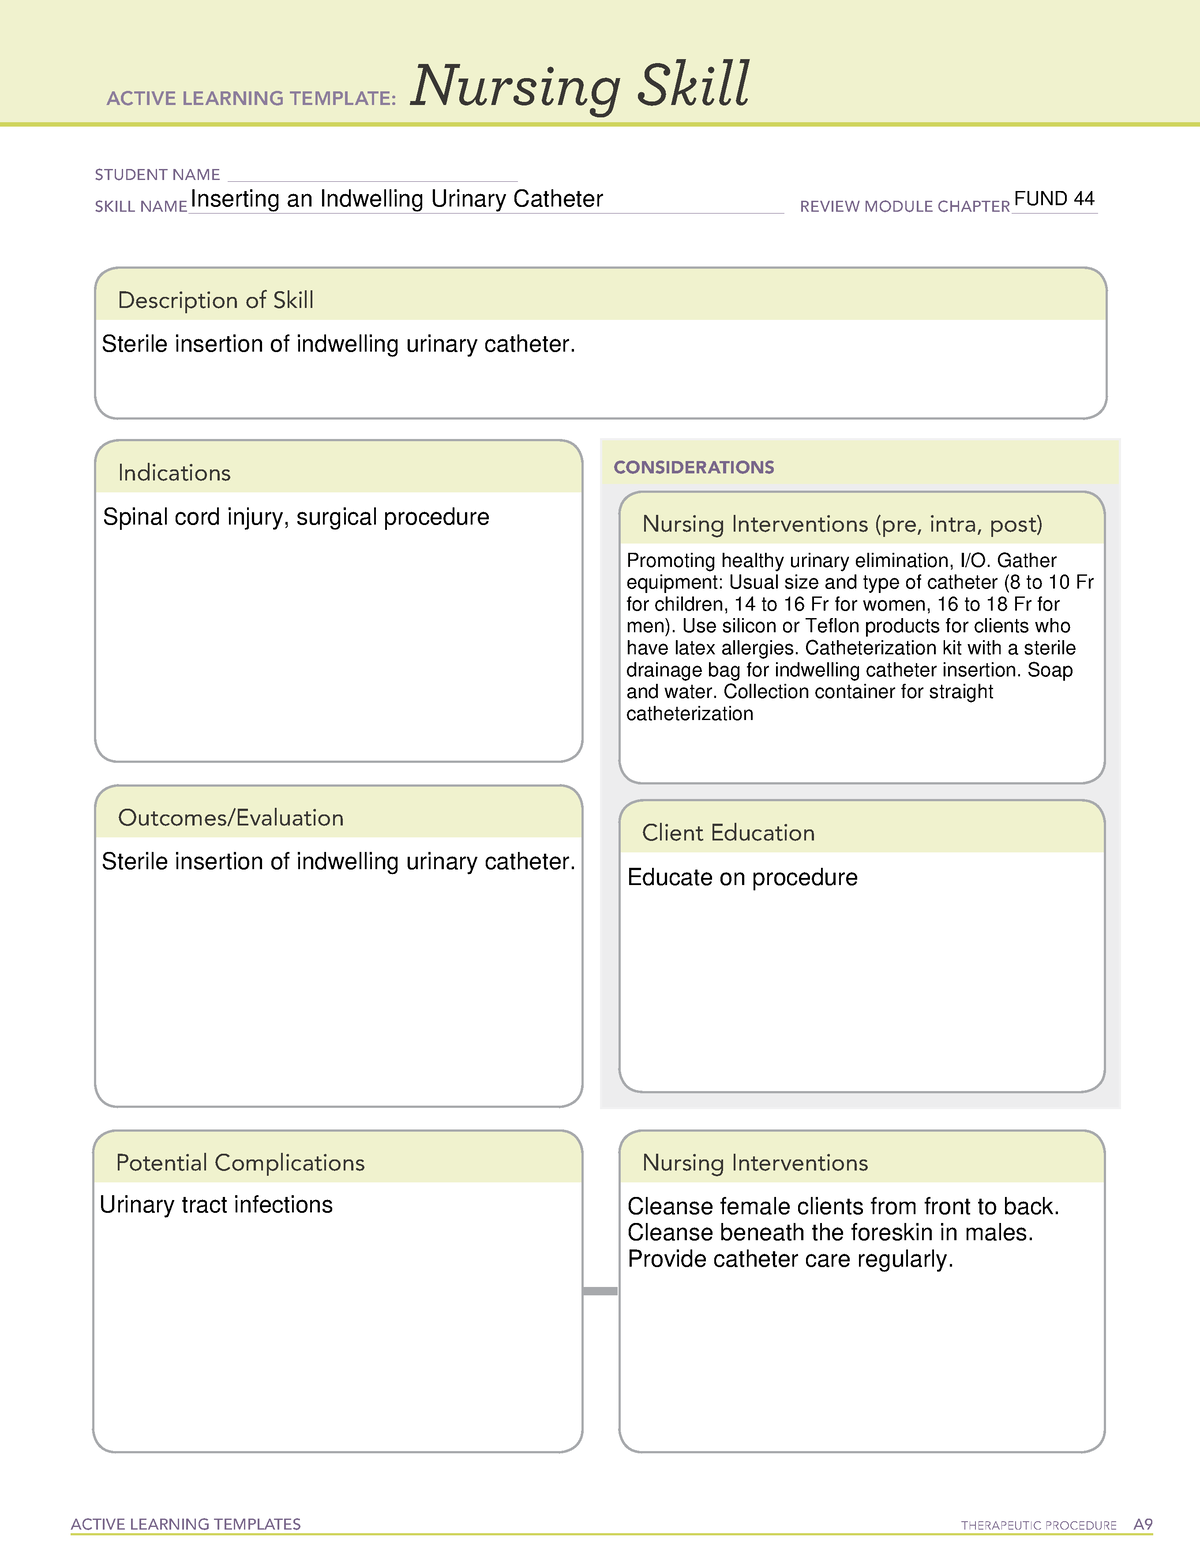 Inserting an Indwelling Urinary Catheter ACTIVE LEARNING TEMPLATES